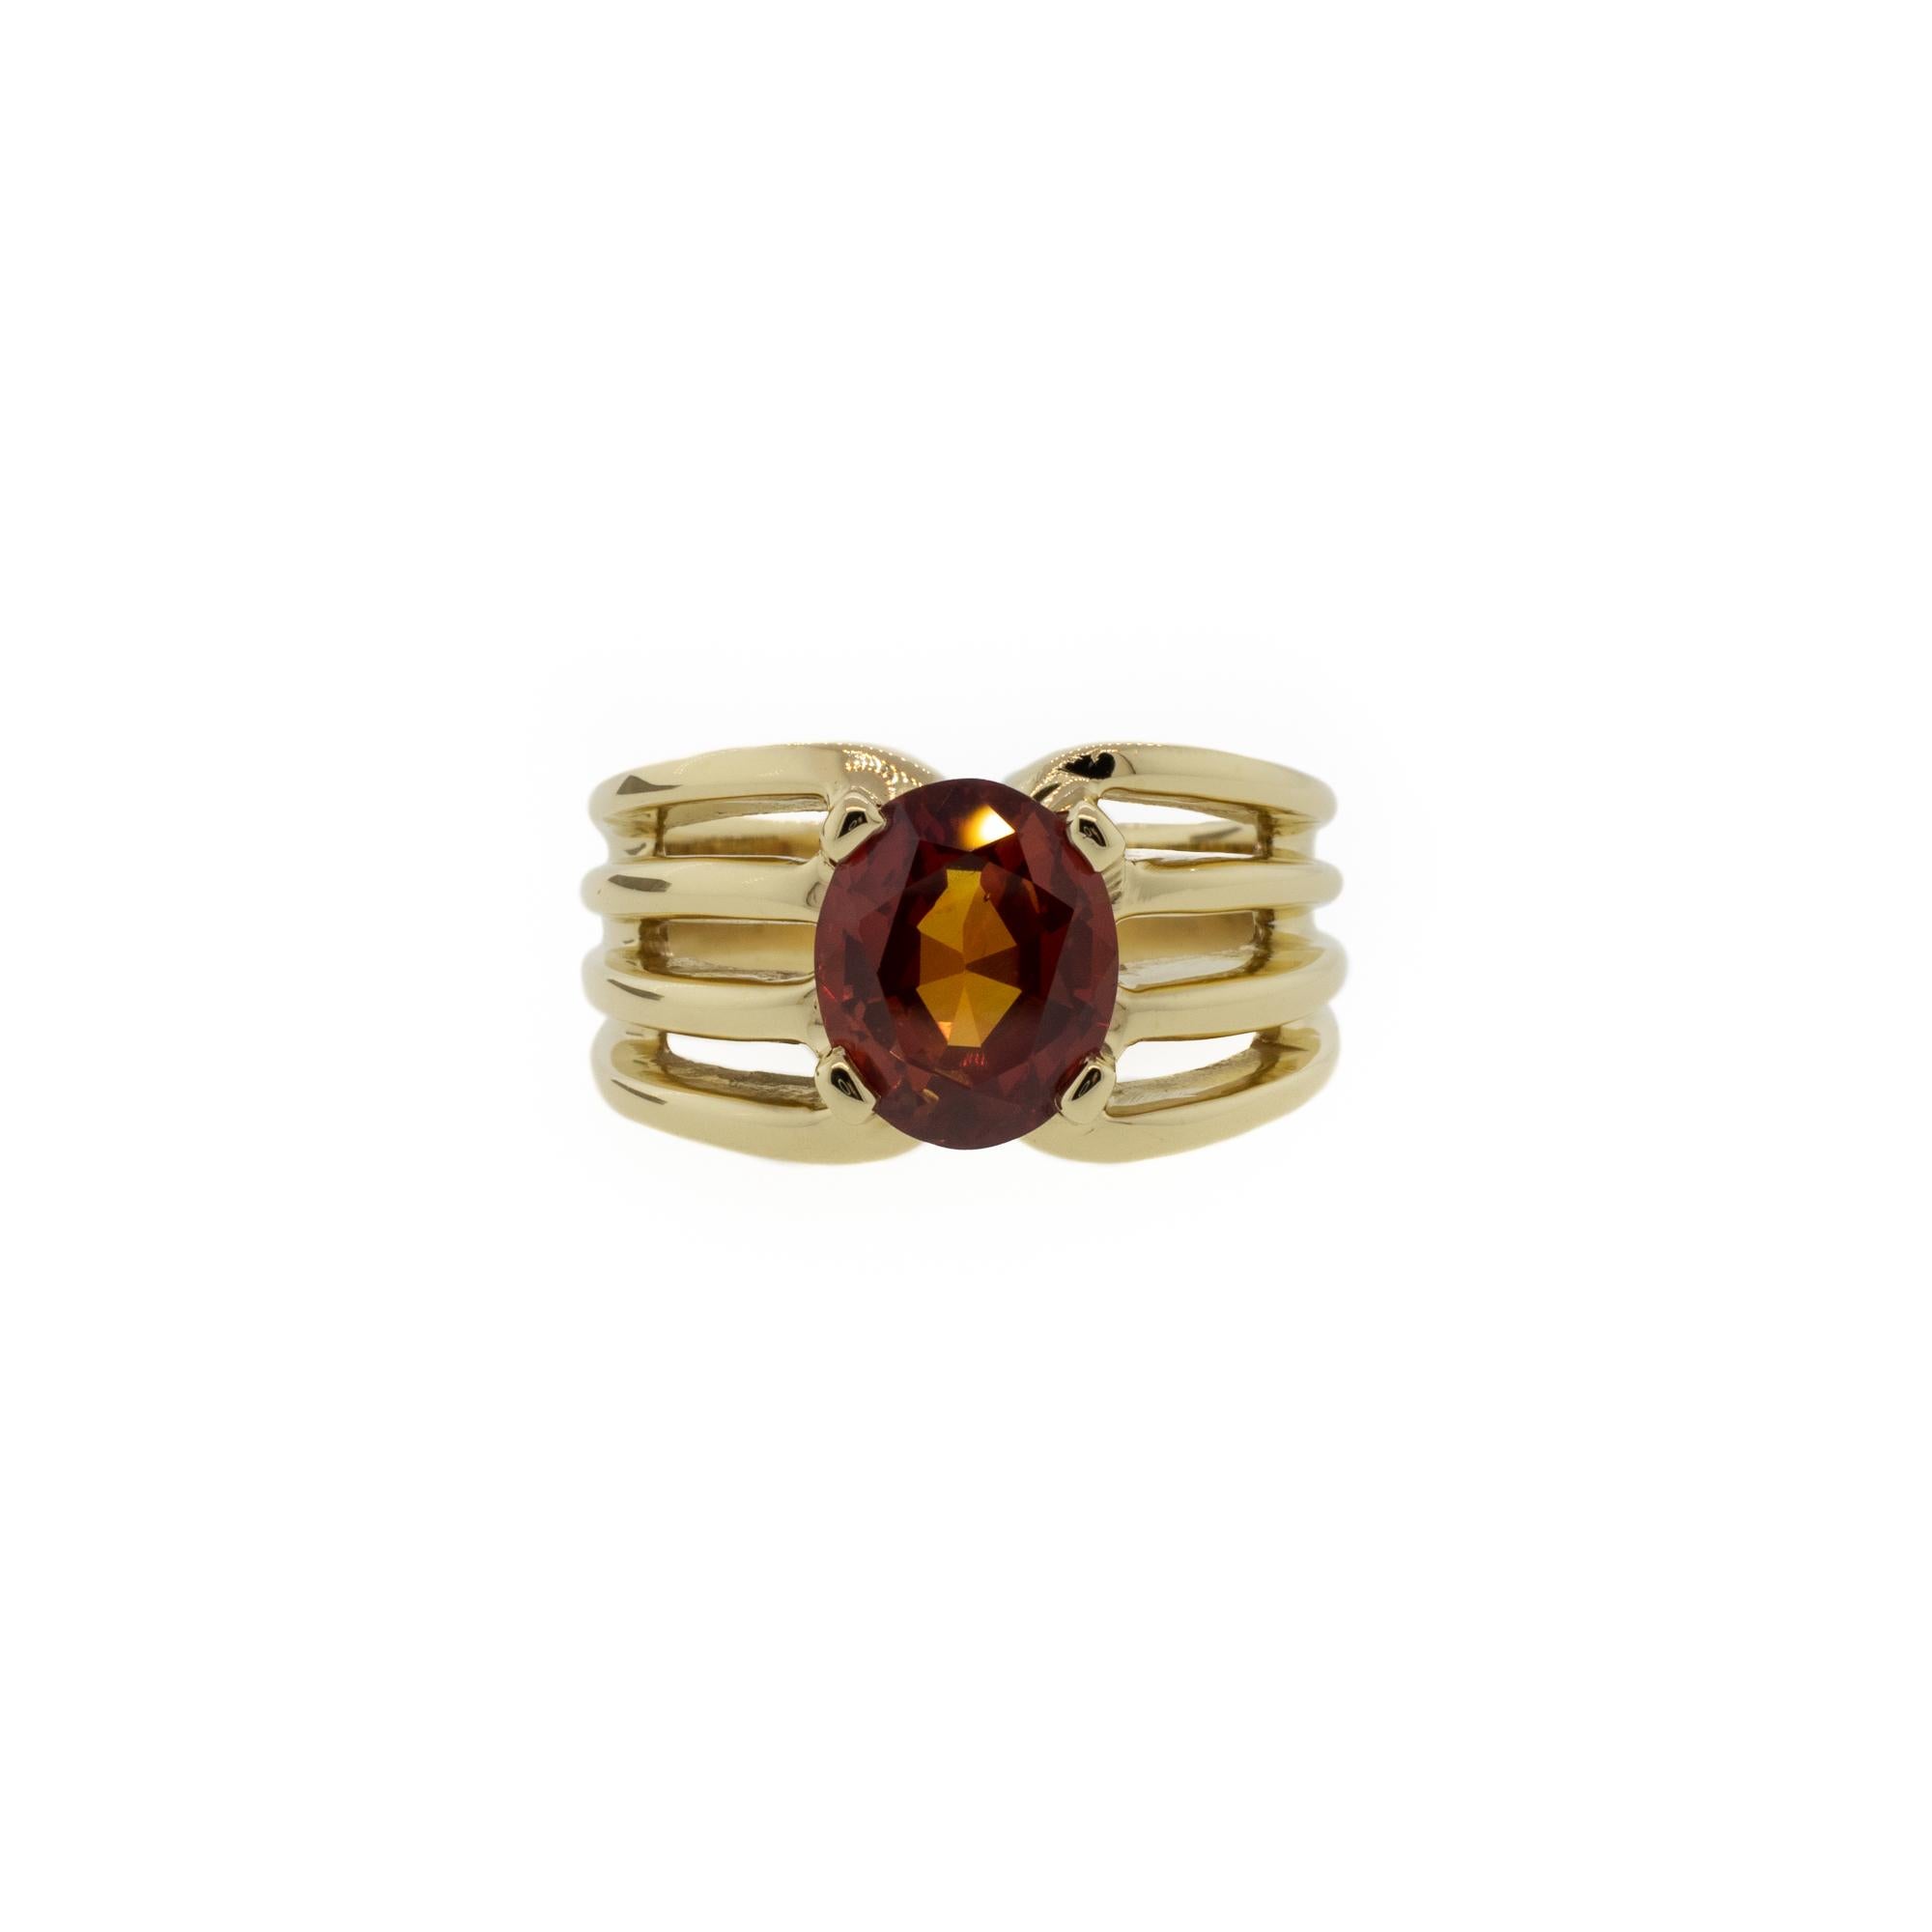 A rare natural UNTREATED burnt orange color sapphire and a uniquely beautiful setting makes this a wonderful one-of-a-kind ring. The 3.22ct natural sapphire is cut in an oval shape. Set in solid 14K yellow gold in a four-prong style with a unique